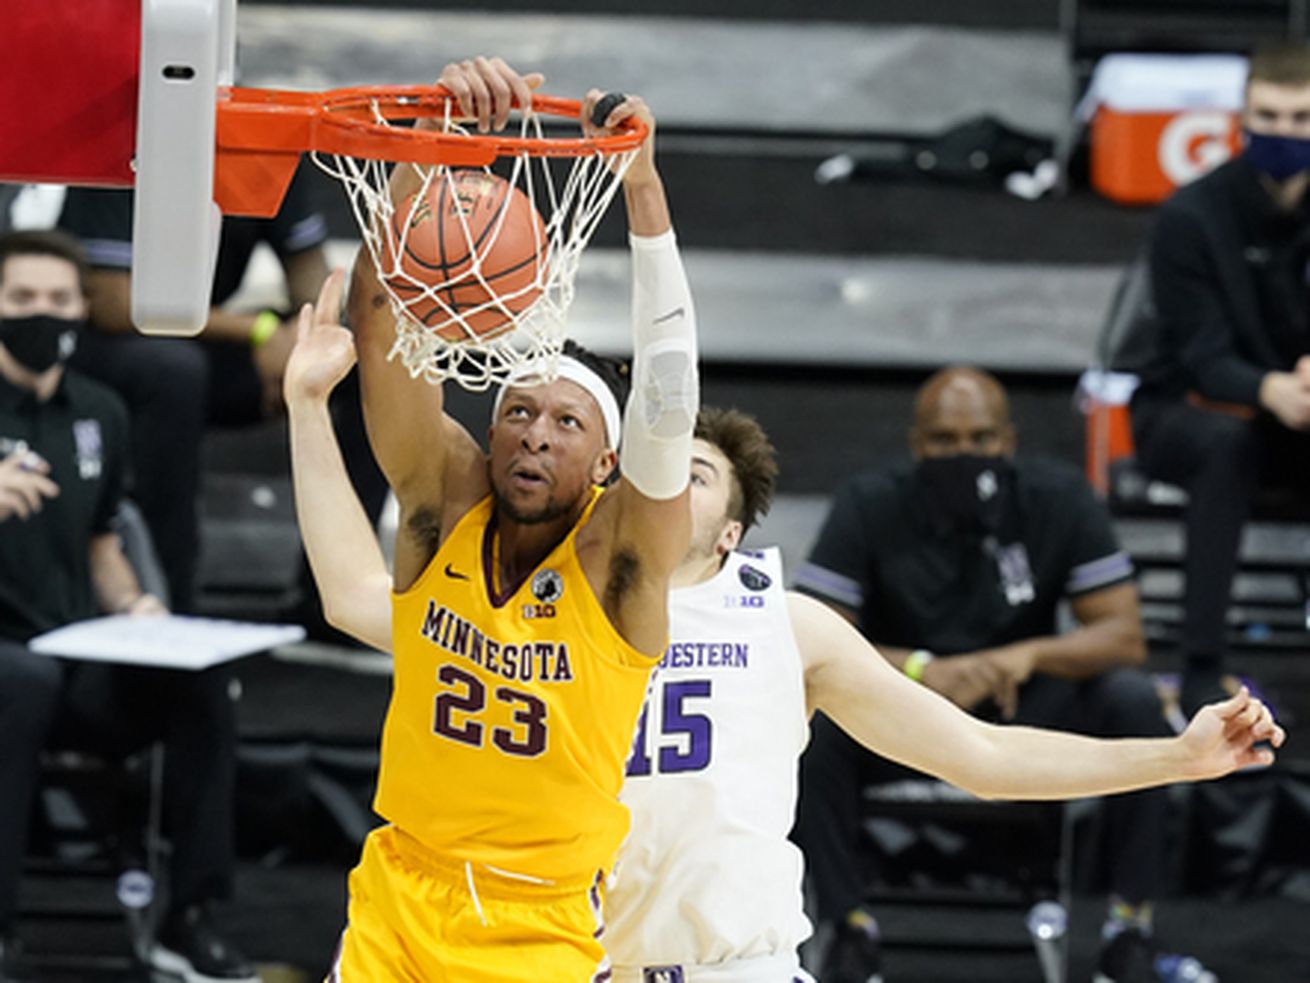 Minnesota’s Brandon Johnson (23) dunks against Northwestern’s Ryan Young (15) during the first half of an NCAA college basketball game at the Big Ten Conference tournament.